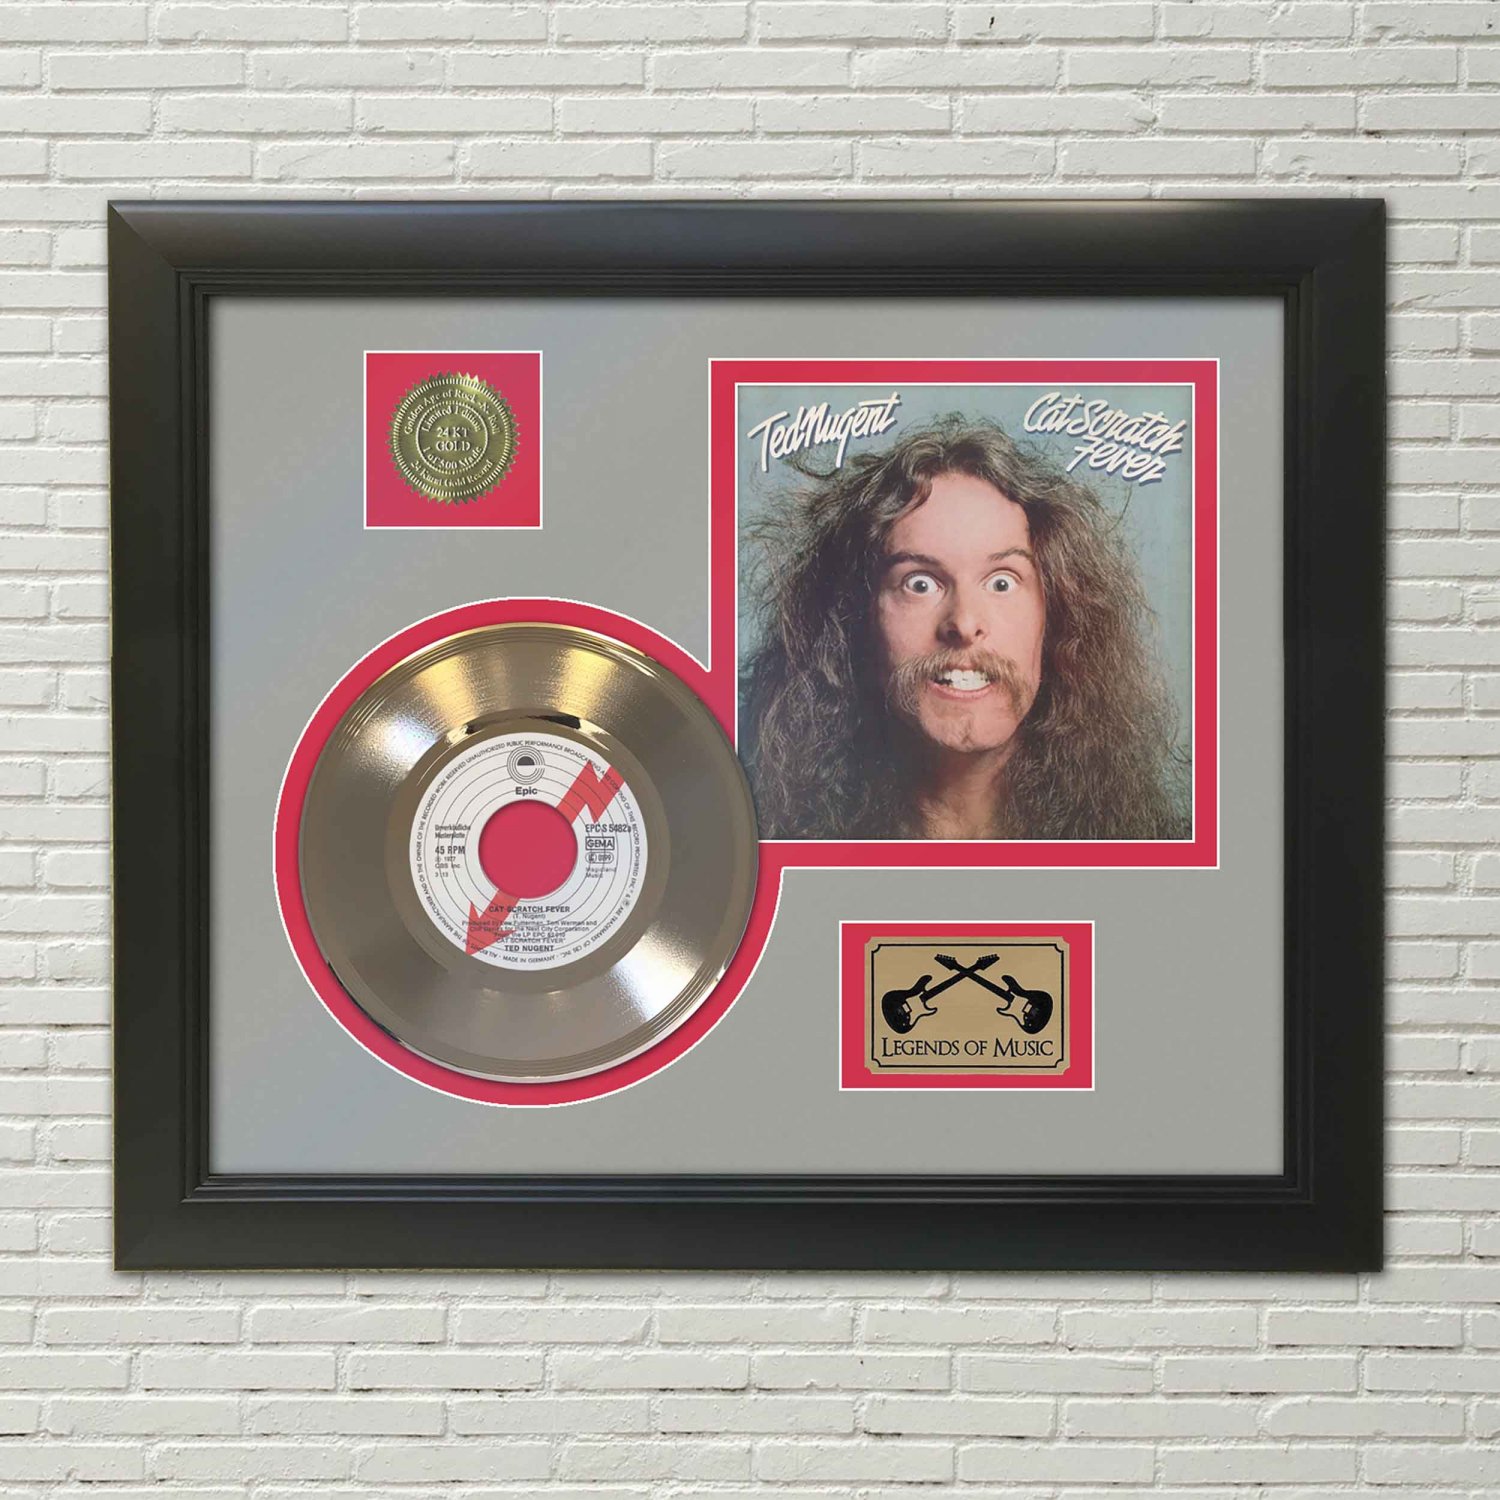 TED NUGET "Cat Scratch Fever"  Framed Picture Sleeve Gold 45 Record Display